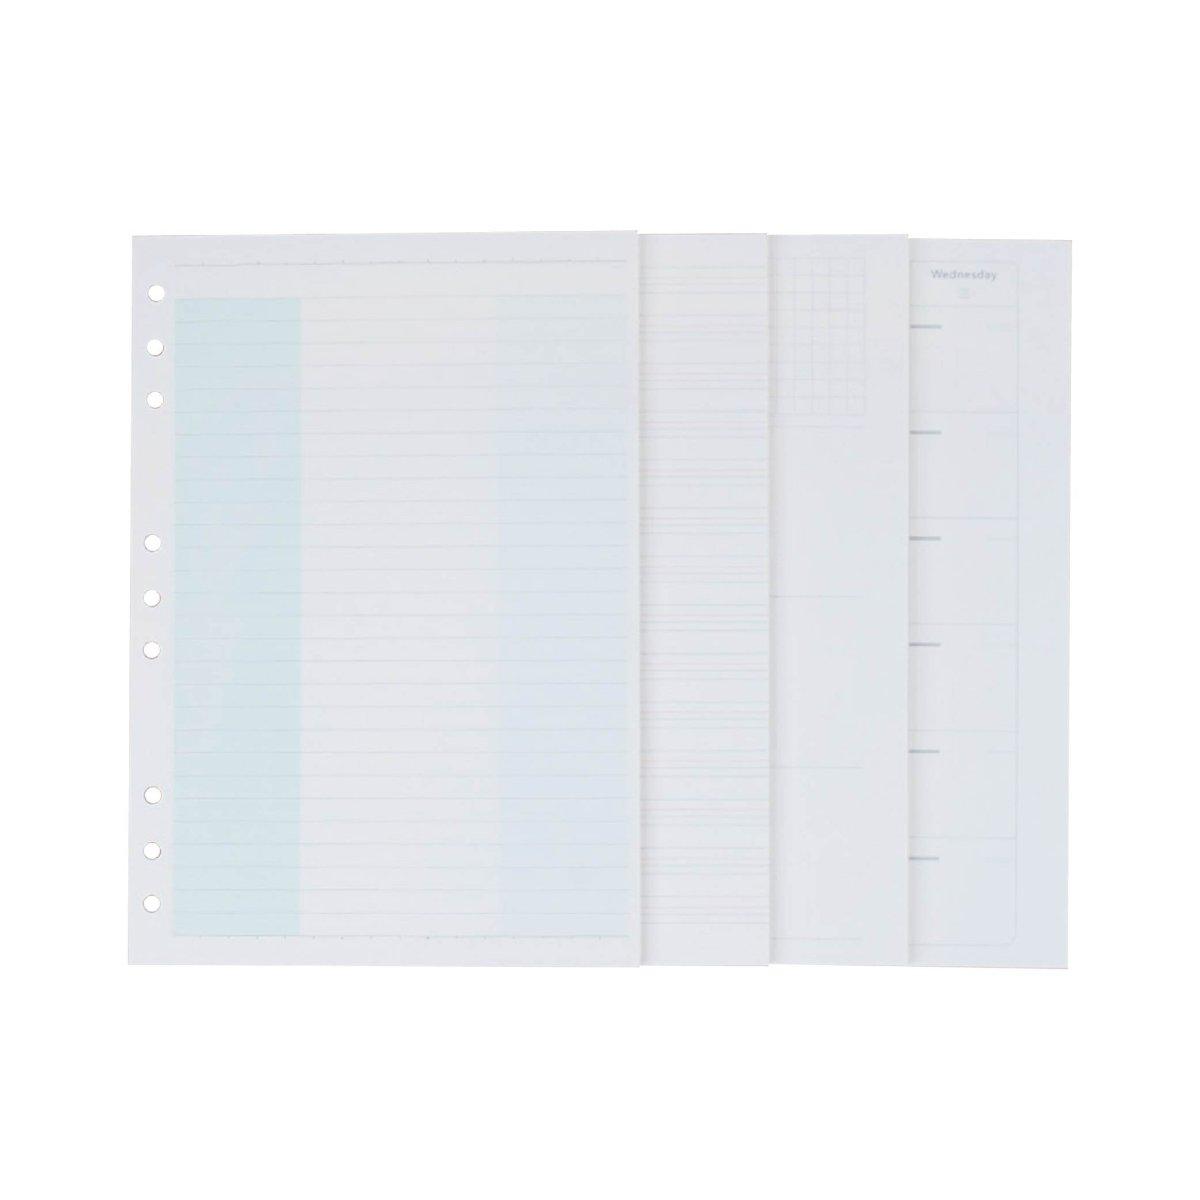 Loose-leaf paper 9-hole notebook inner page paper replacement core B5 45 sheets NP-H7TIW-512